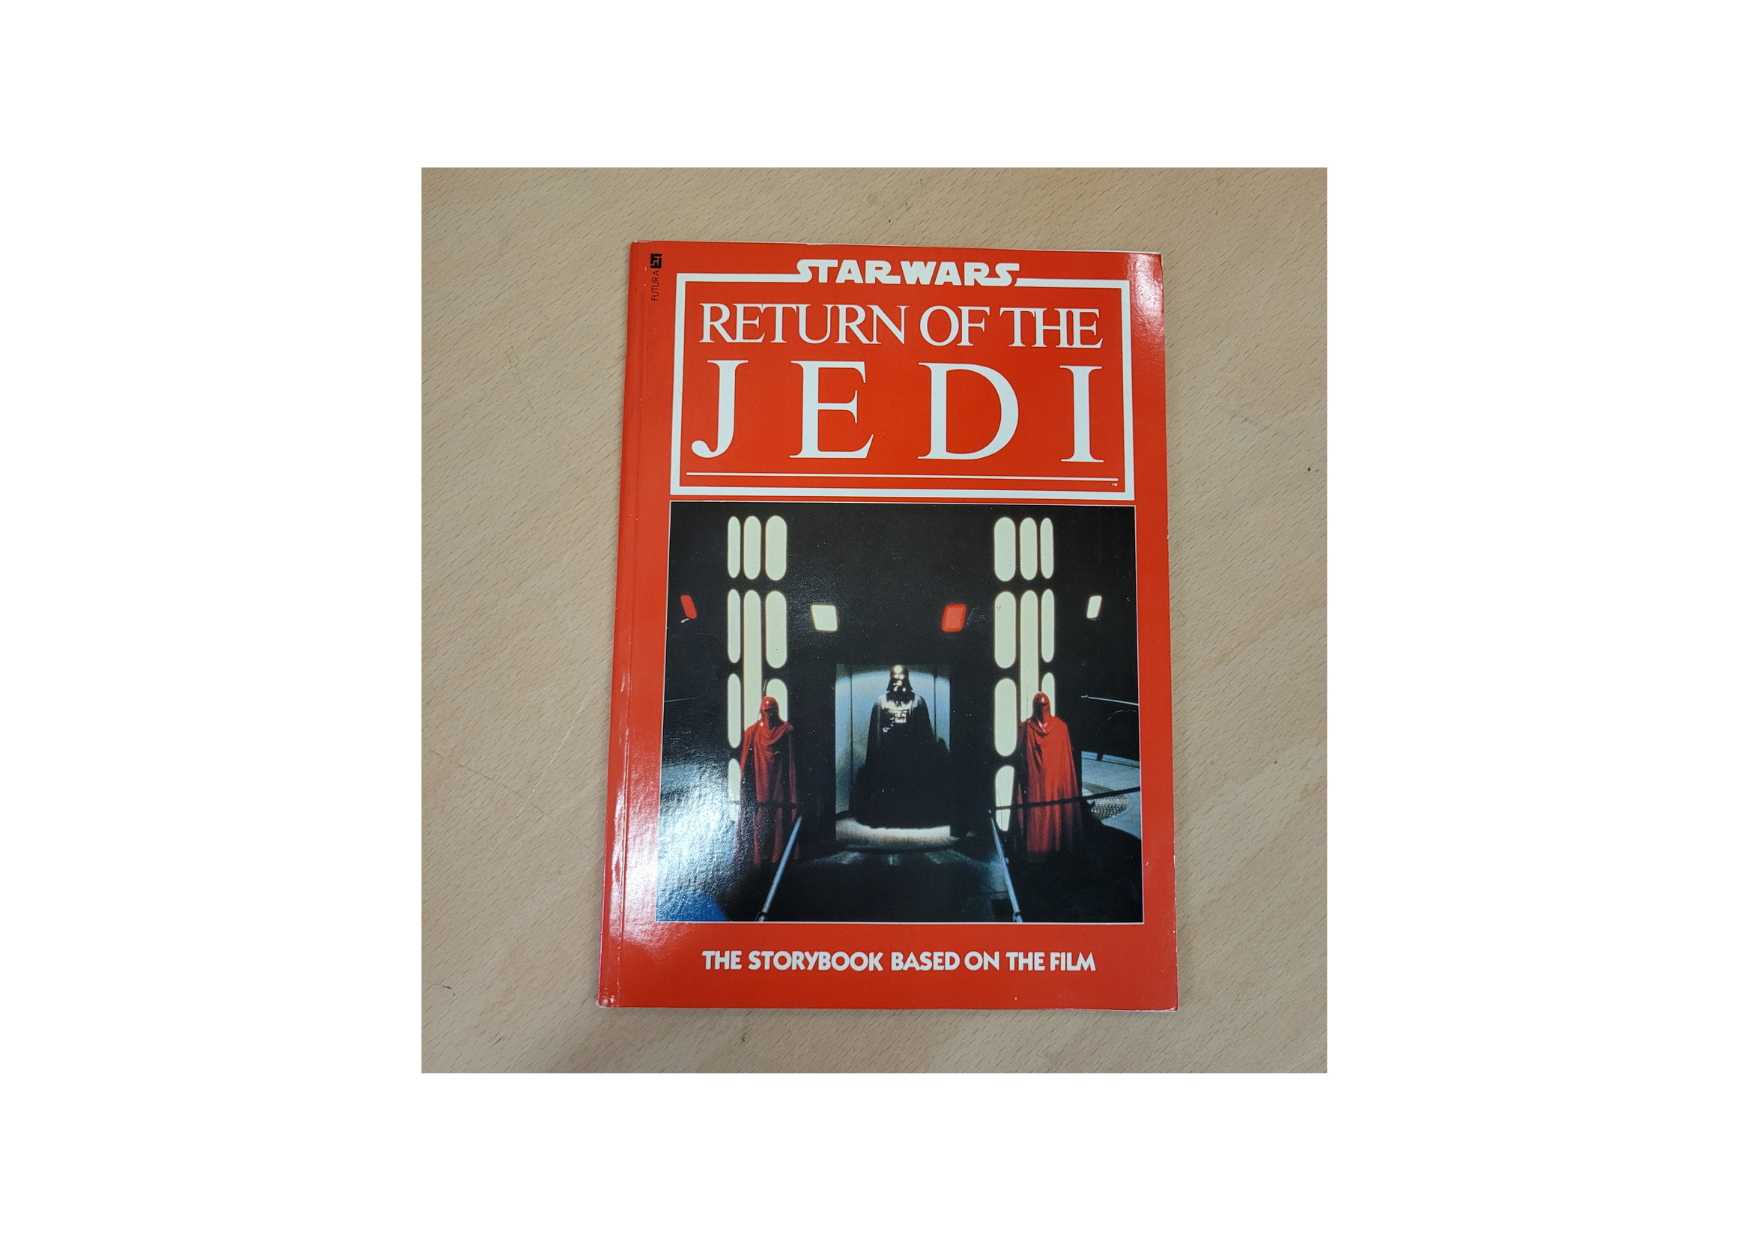 Star Wars Return of the Jedi Storybook Front View